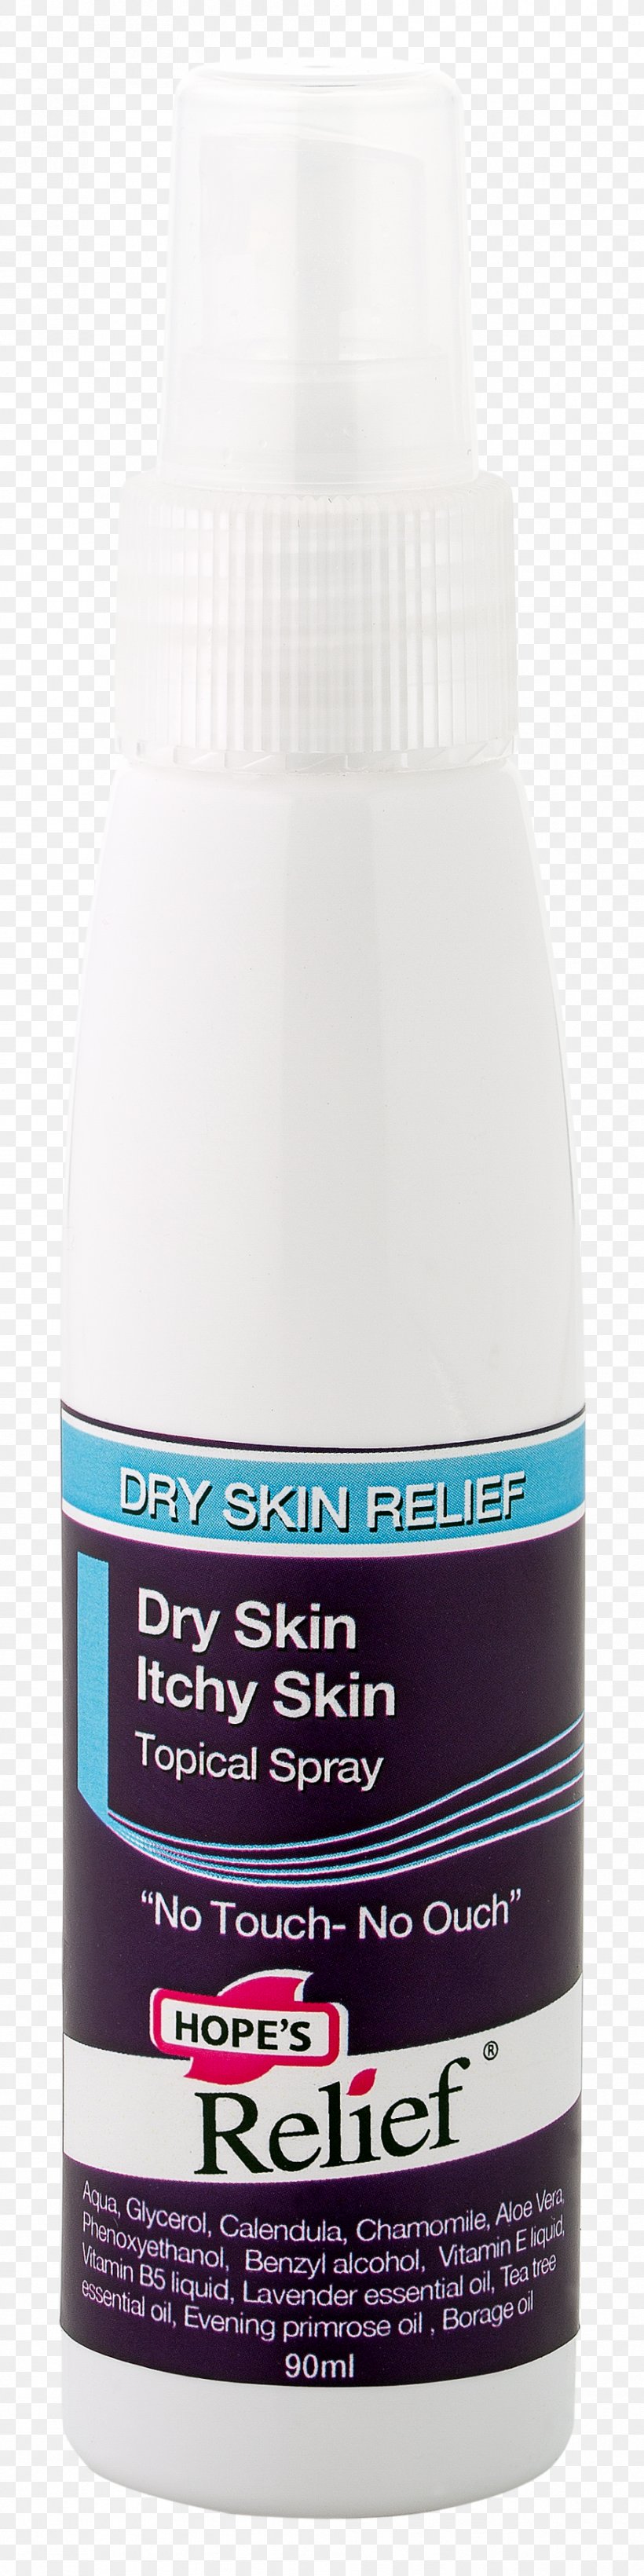 Relief Lotion Liquid Shower Gel Emulsion, PNG, 941x3764px, Relief, Antipruritic, Australia, Emulsion, Itch Download Free